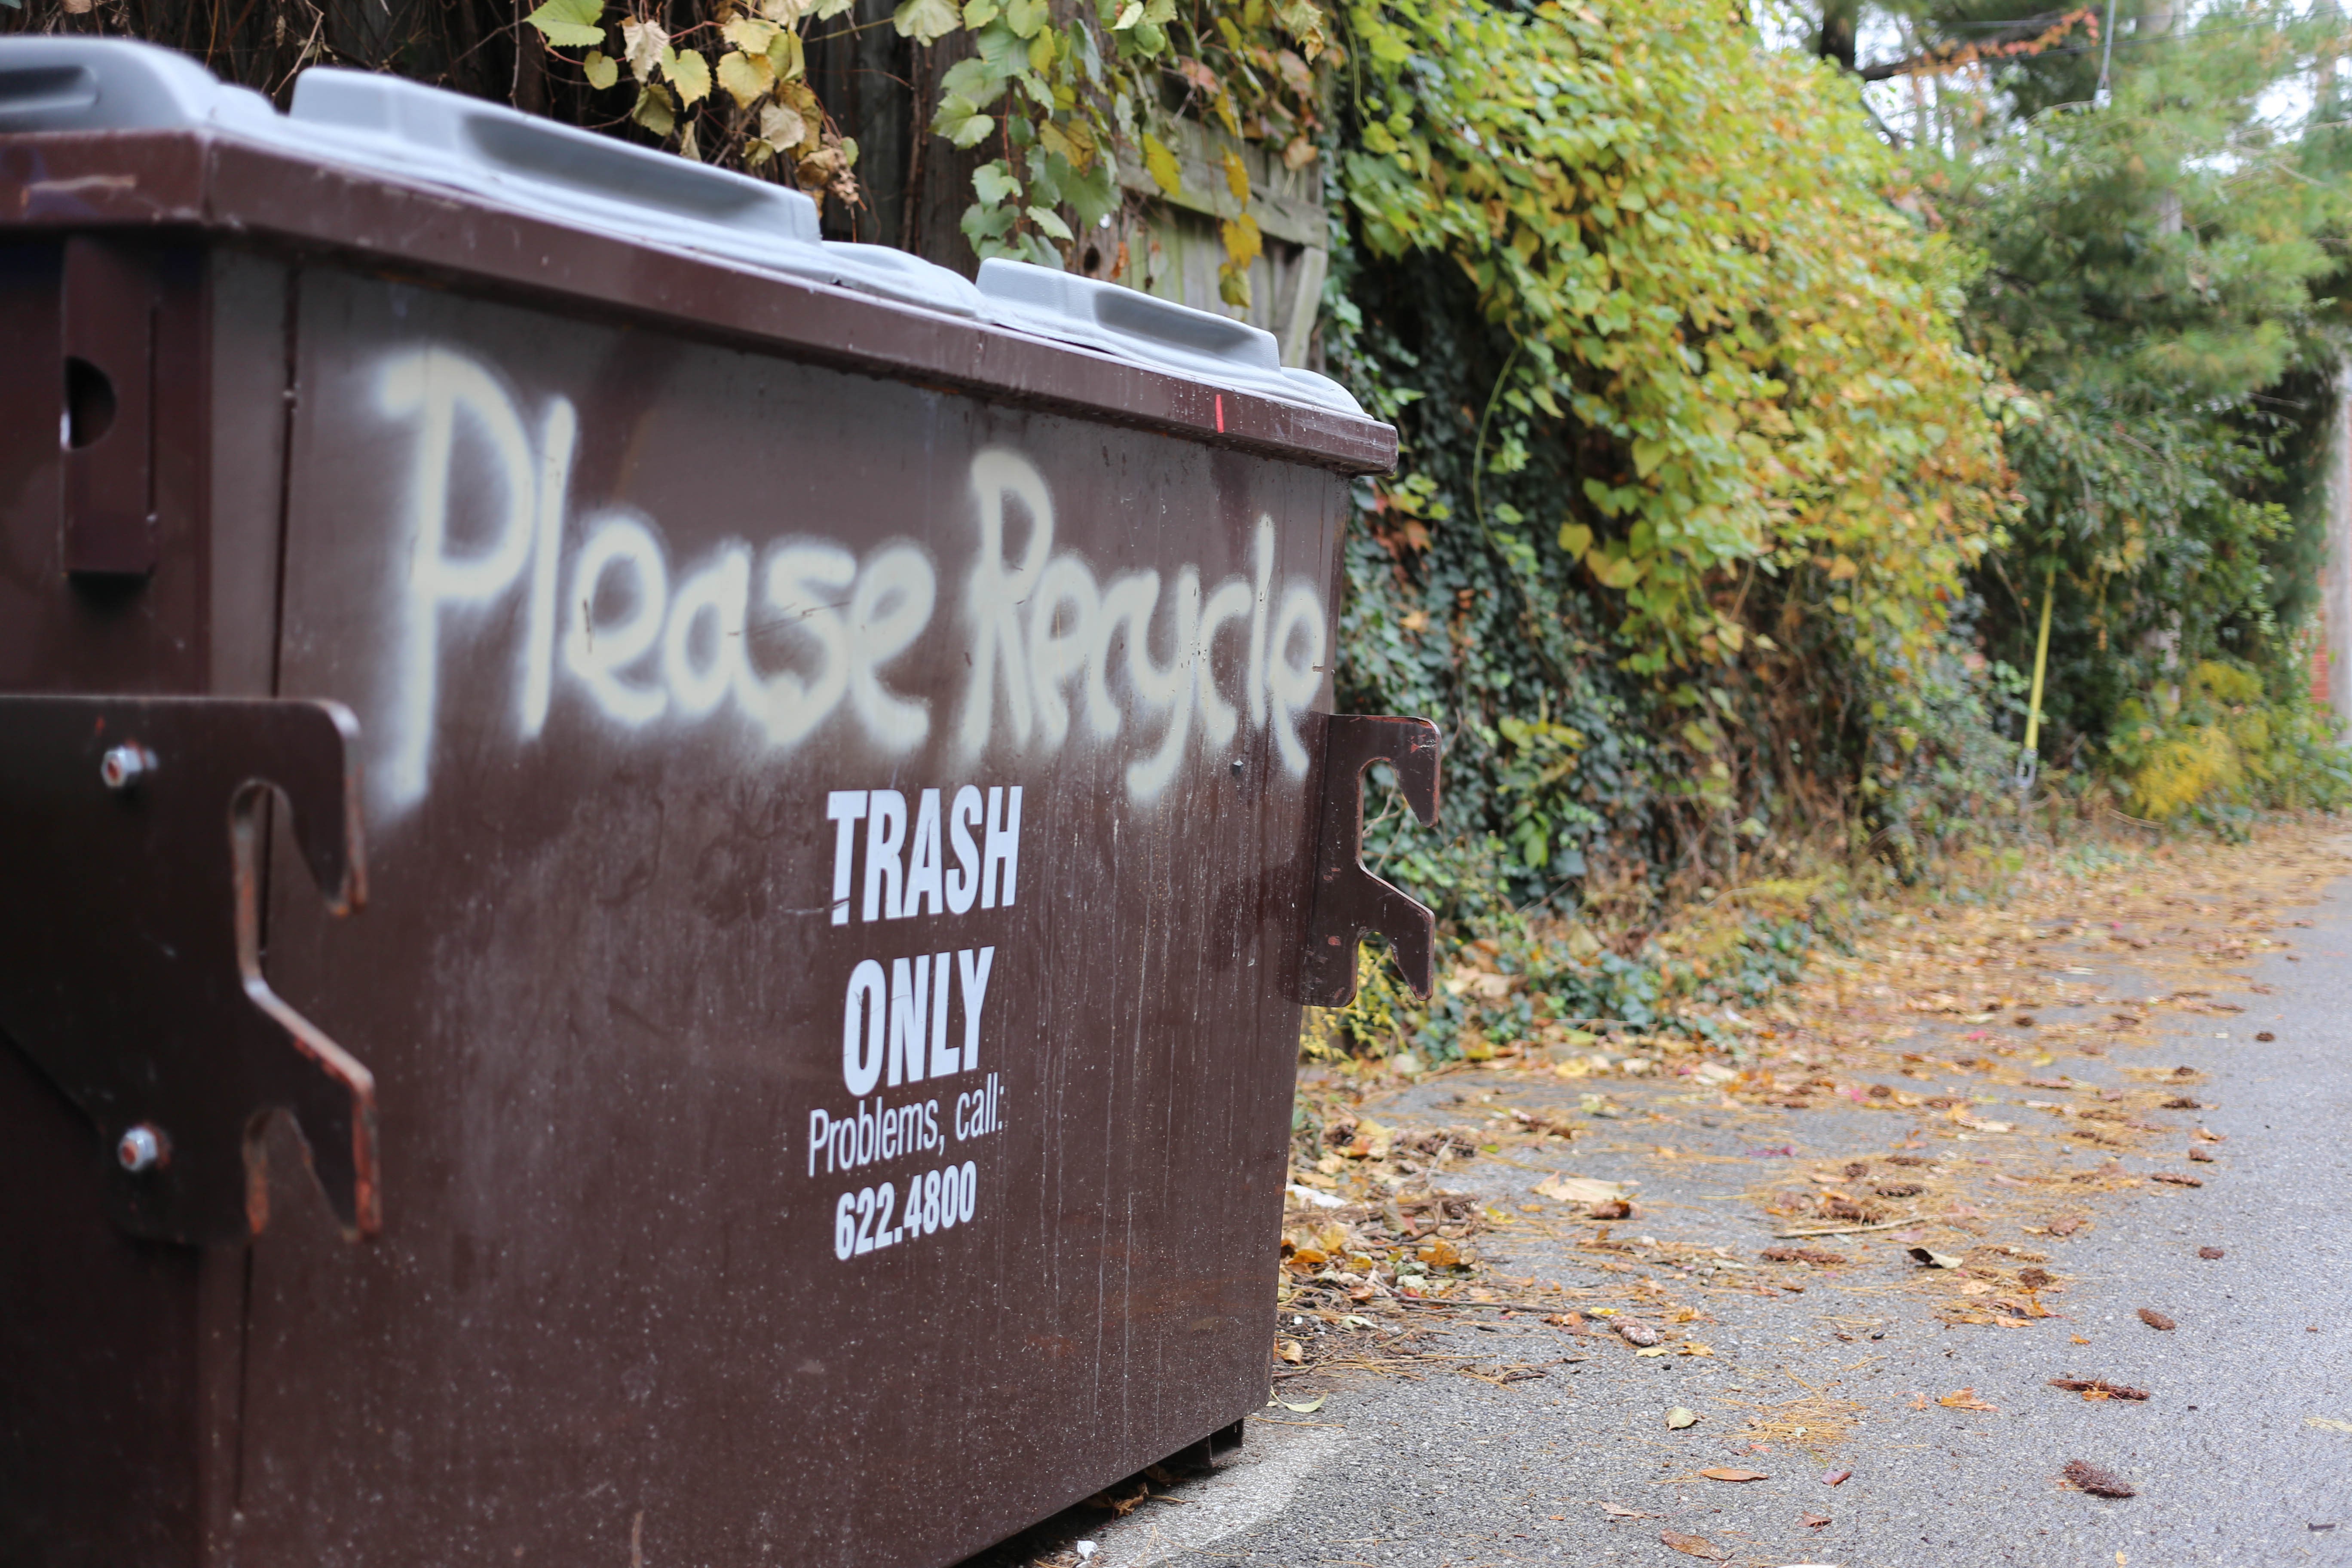 Let's Talk Trash: Recycling bins don't sort themselves - Powell River Peak